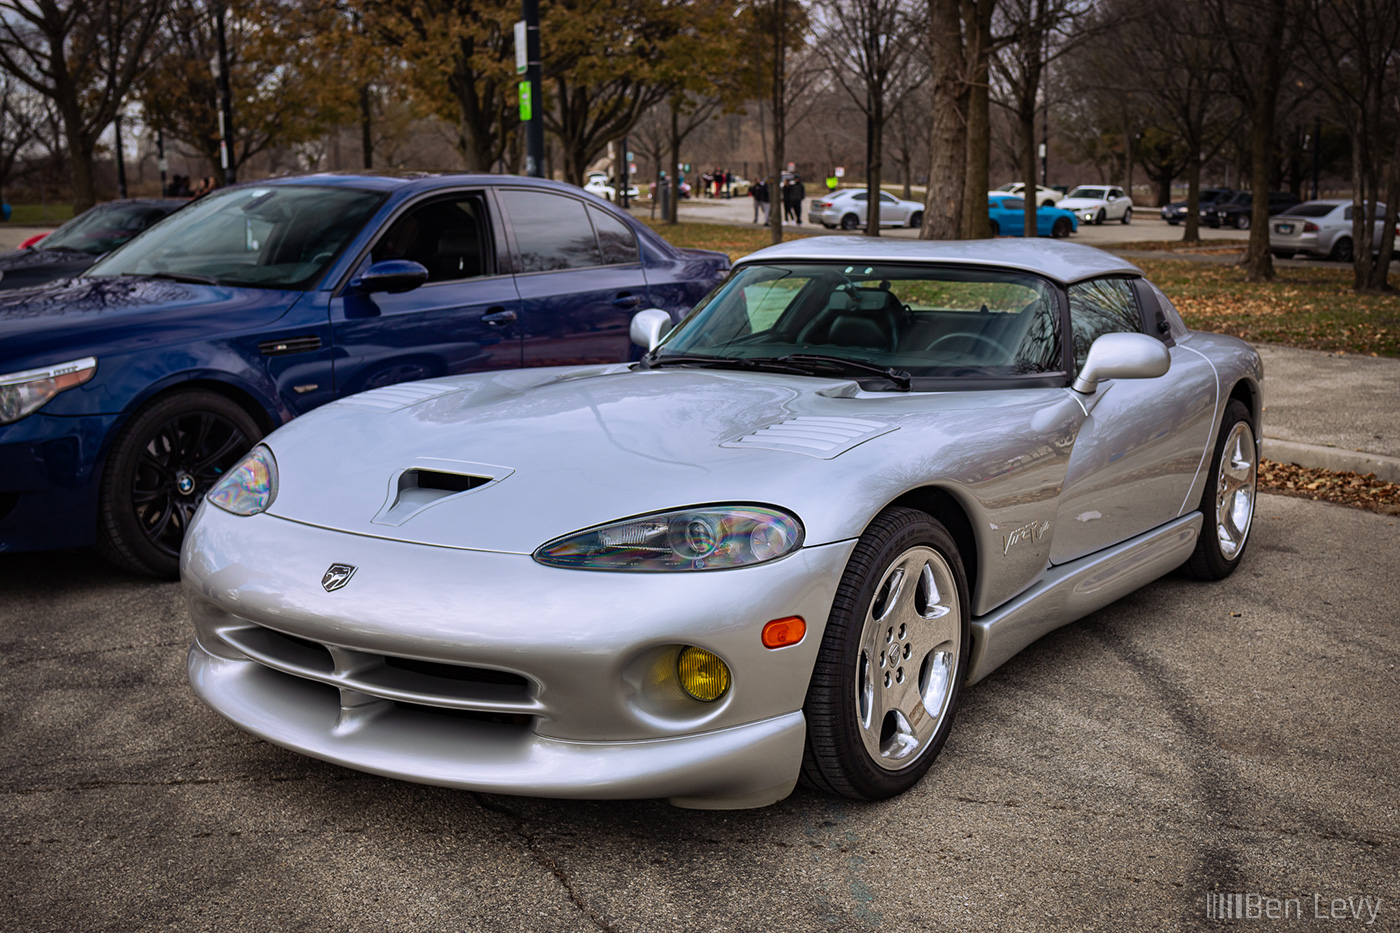 Silver Dodge Viper in Chicago Parking Lot